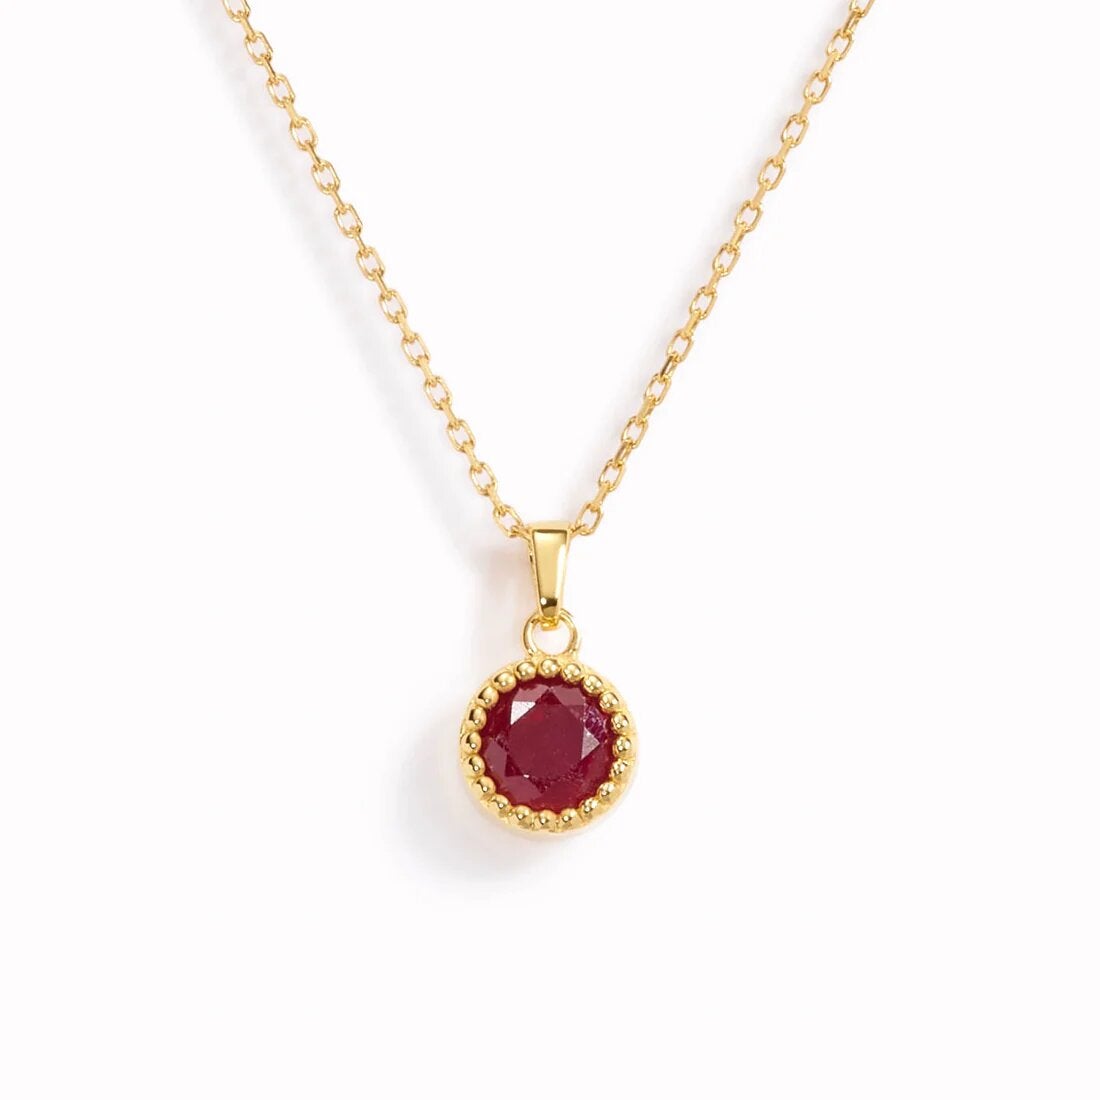 Linjer + July Birthstone Necklace – Opaque Ruby